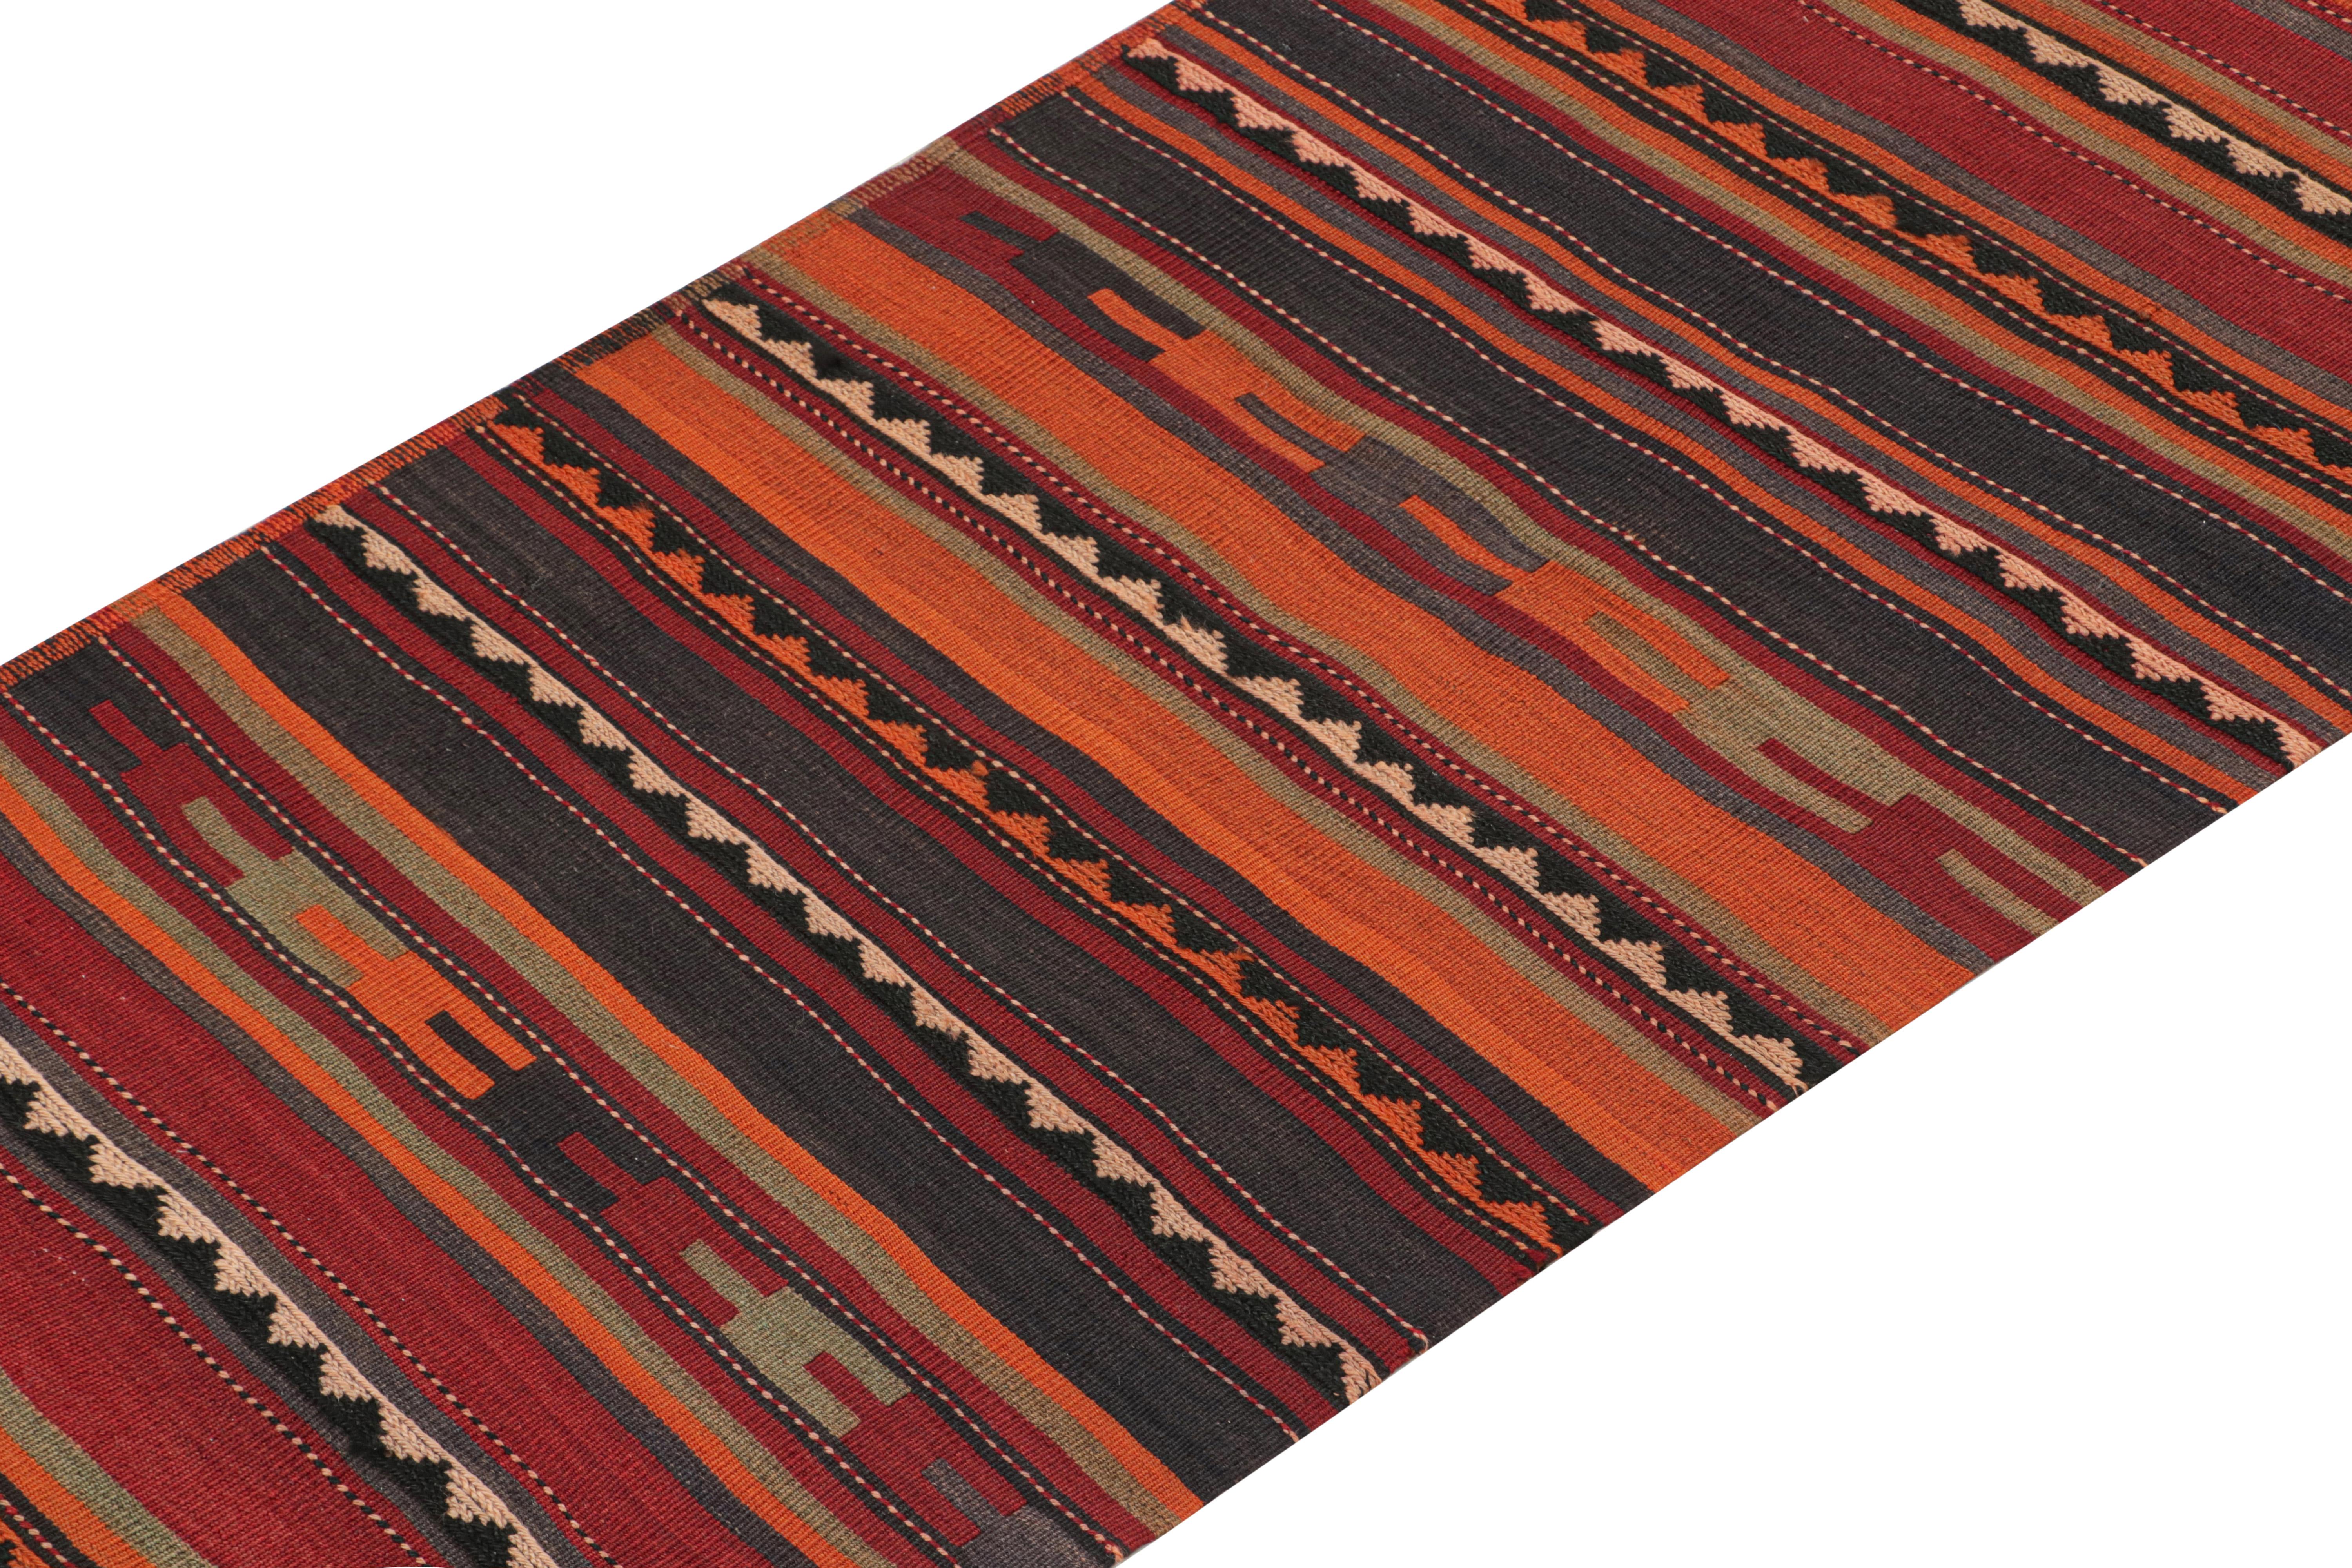 Hand-Knotted Vintage Persian Kilim Runner in Orange with Geometric Patterns by Rug & Kilim For Sale